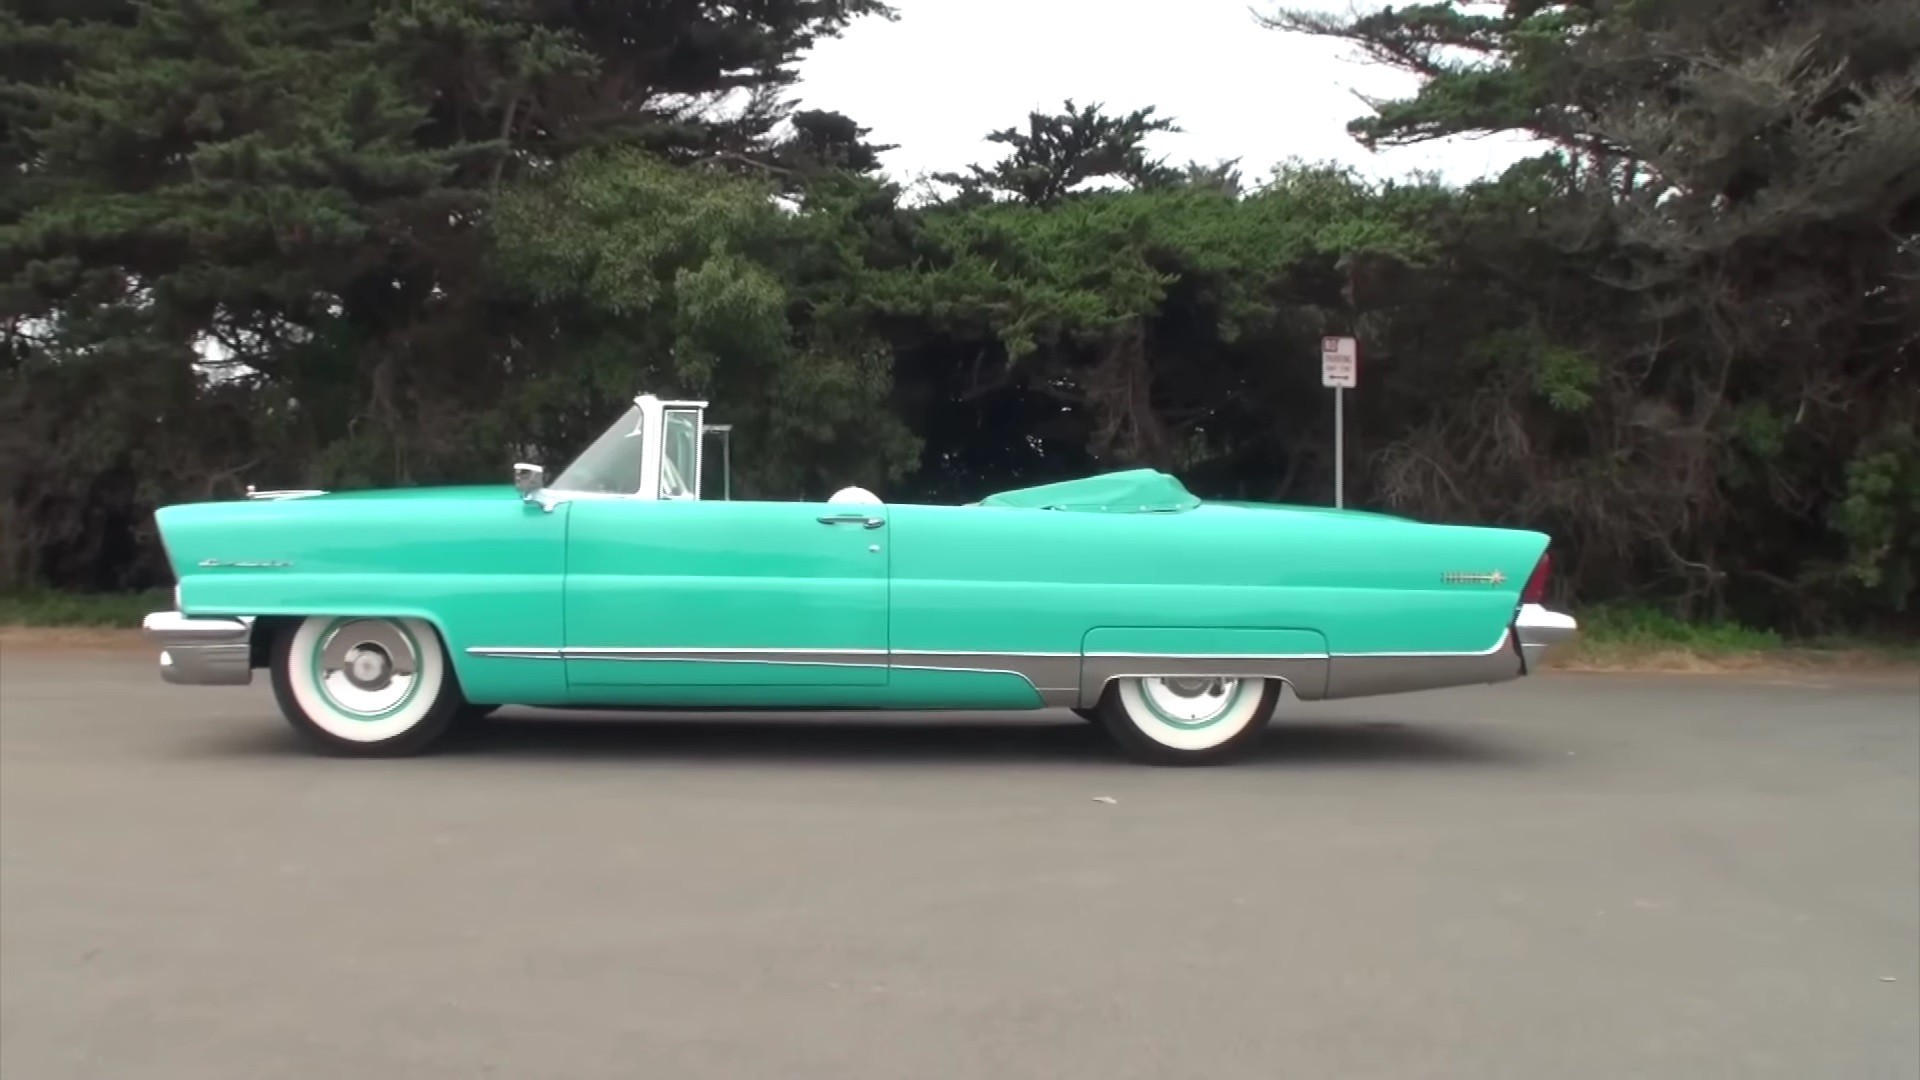 One 1956 Lincoln Premiere Is a Rare, Cool-Adorned Classic Clad